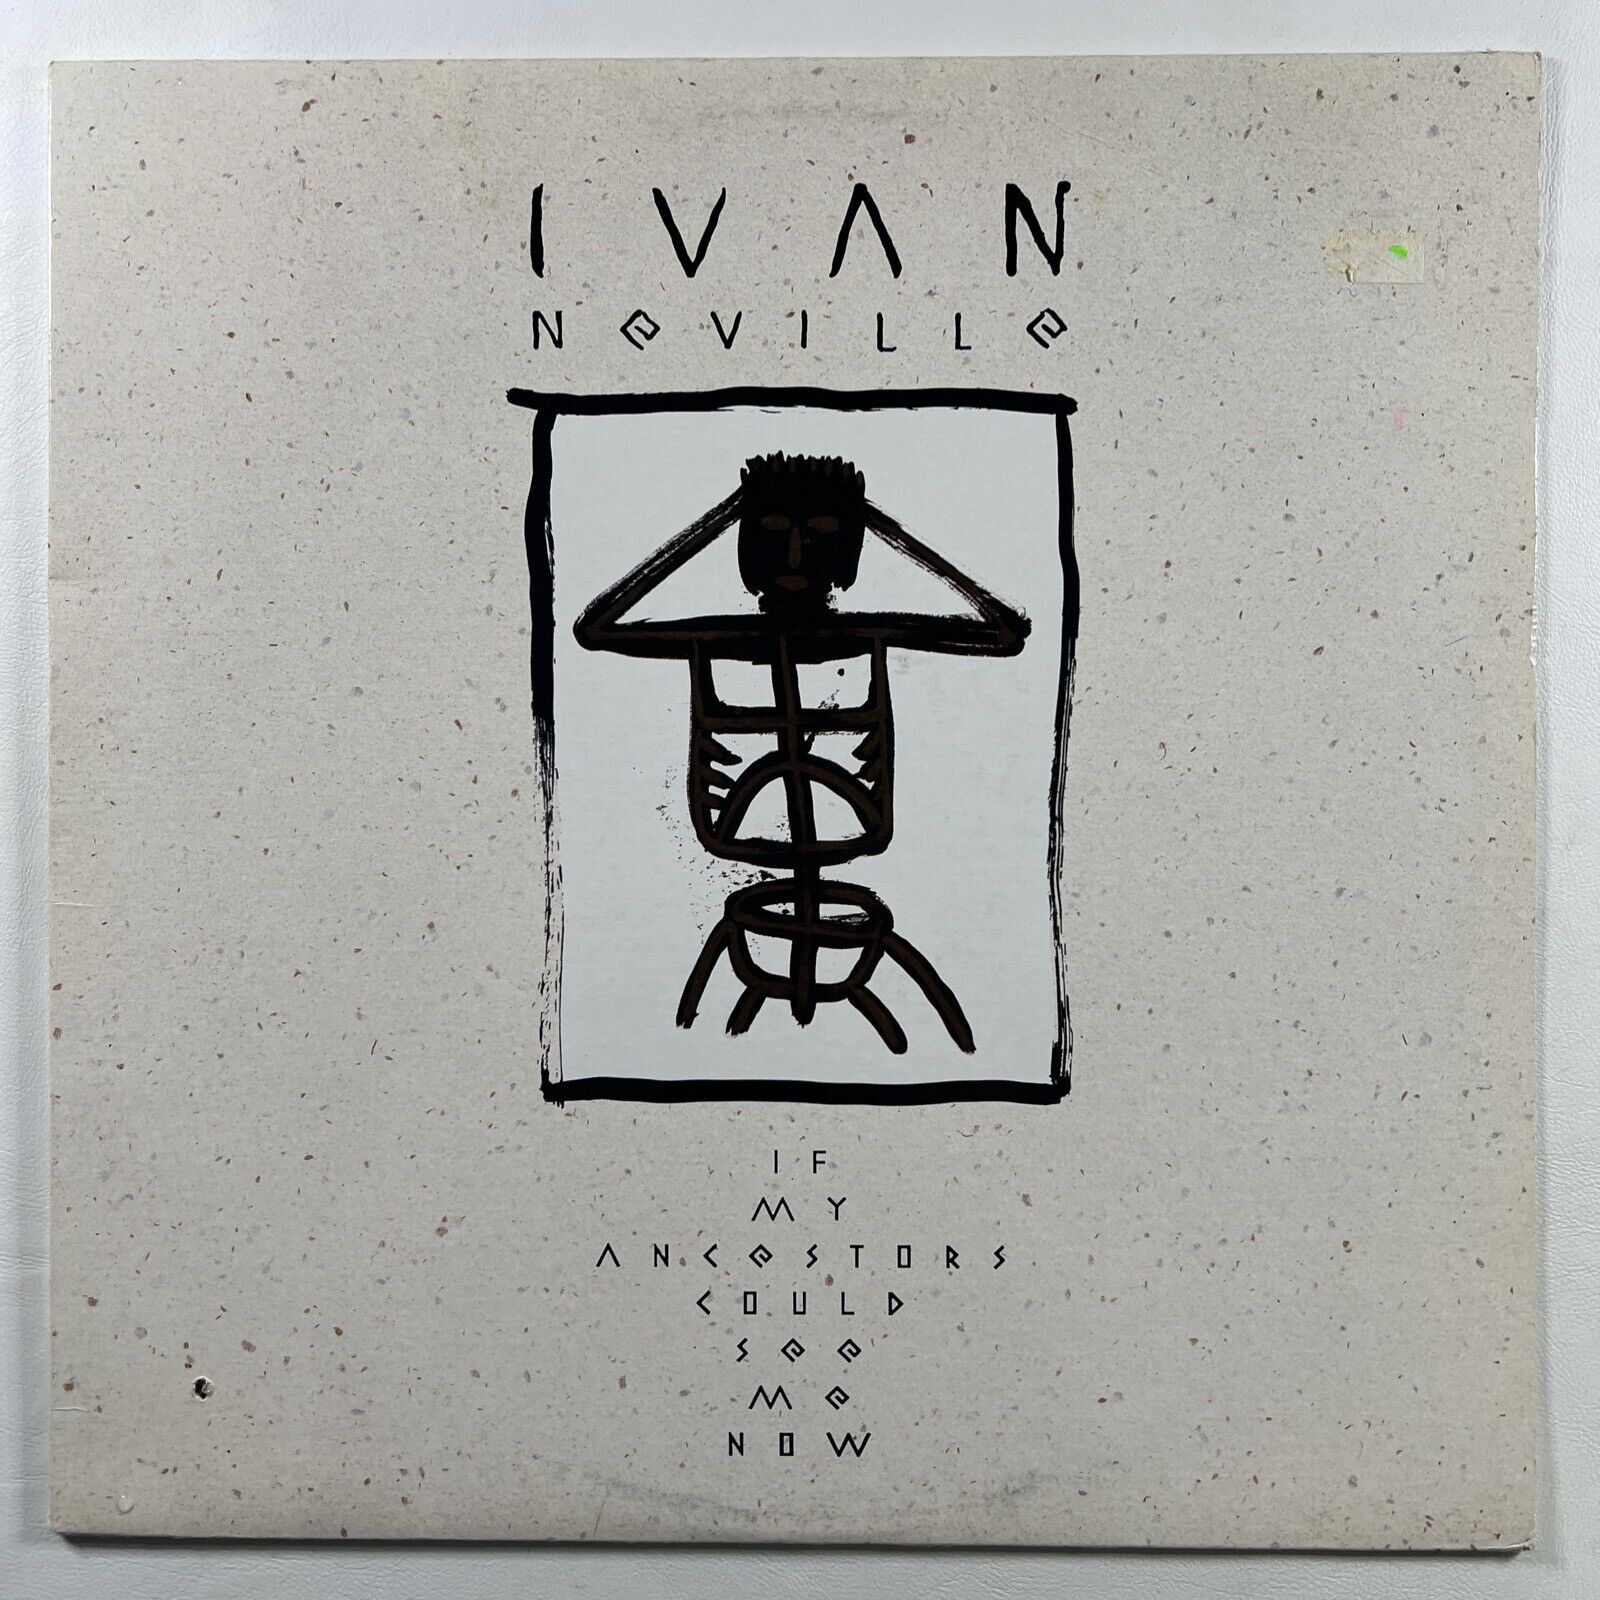 Ivan Neville “If My Ancestors Could See Me Now” LP/Polydor (NM) 1988